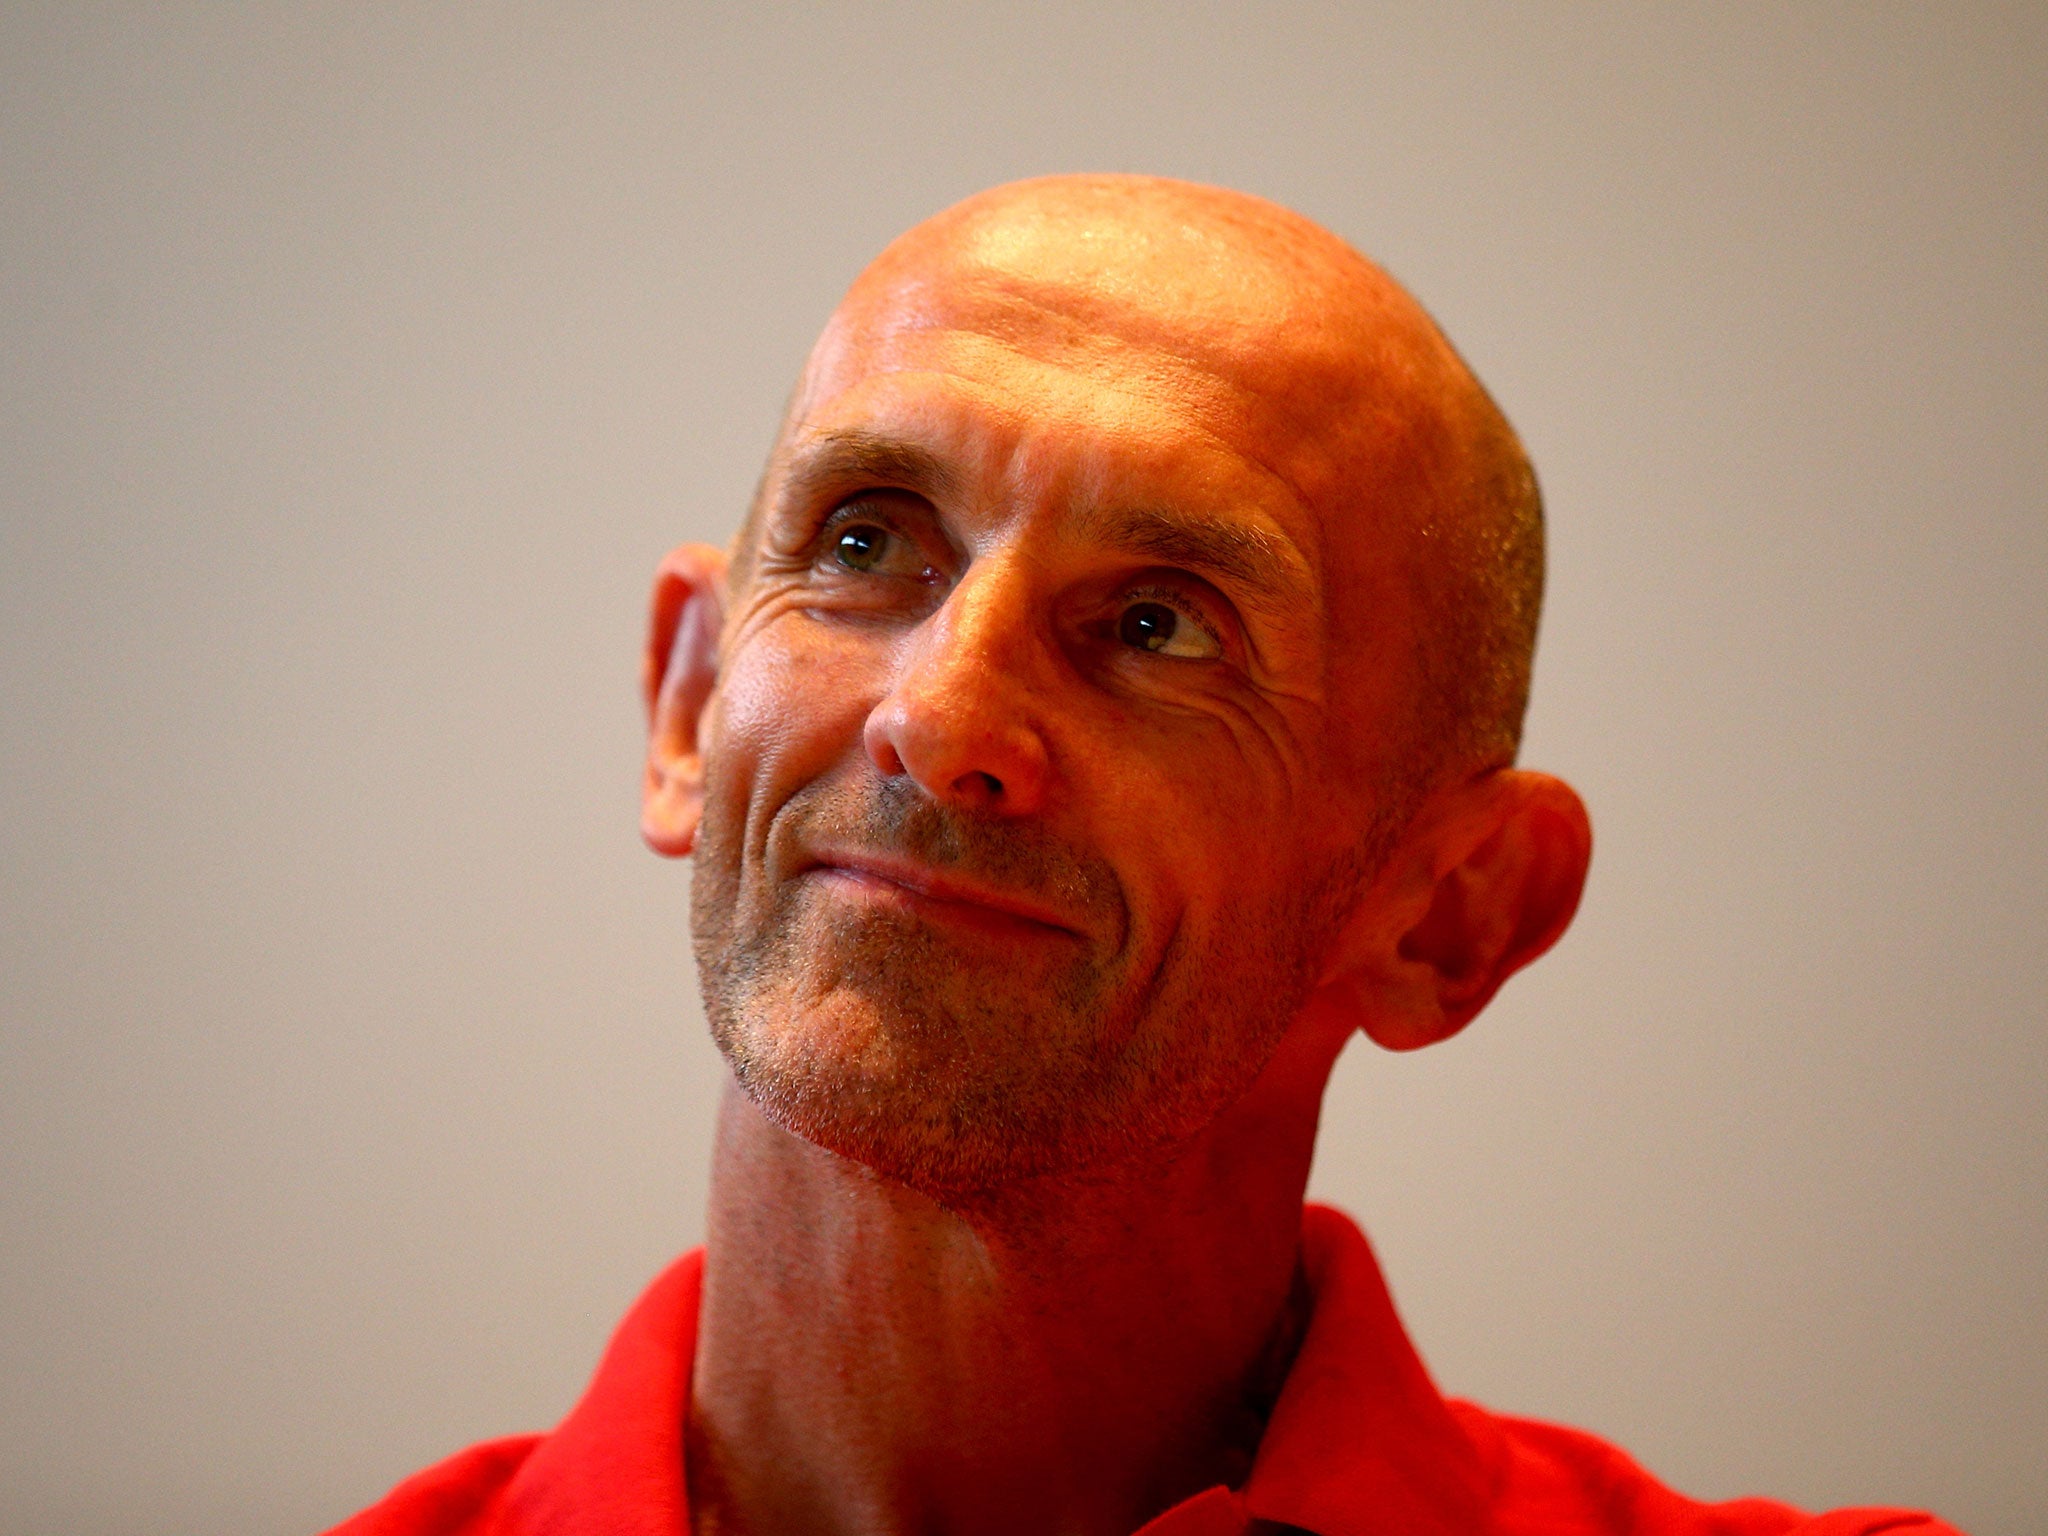 Head of British Athletics Neil Black is confident all four relay teams can win medals at this year’s World Championships and the Olympics in 2016